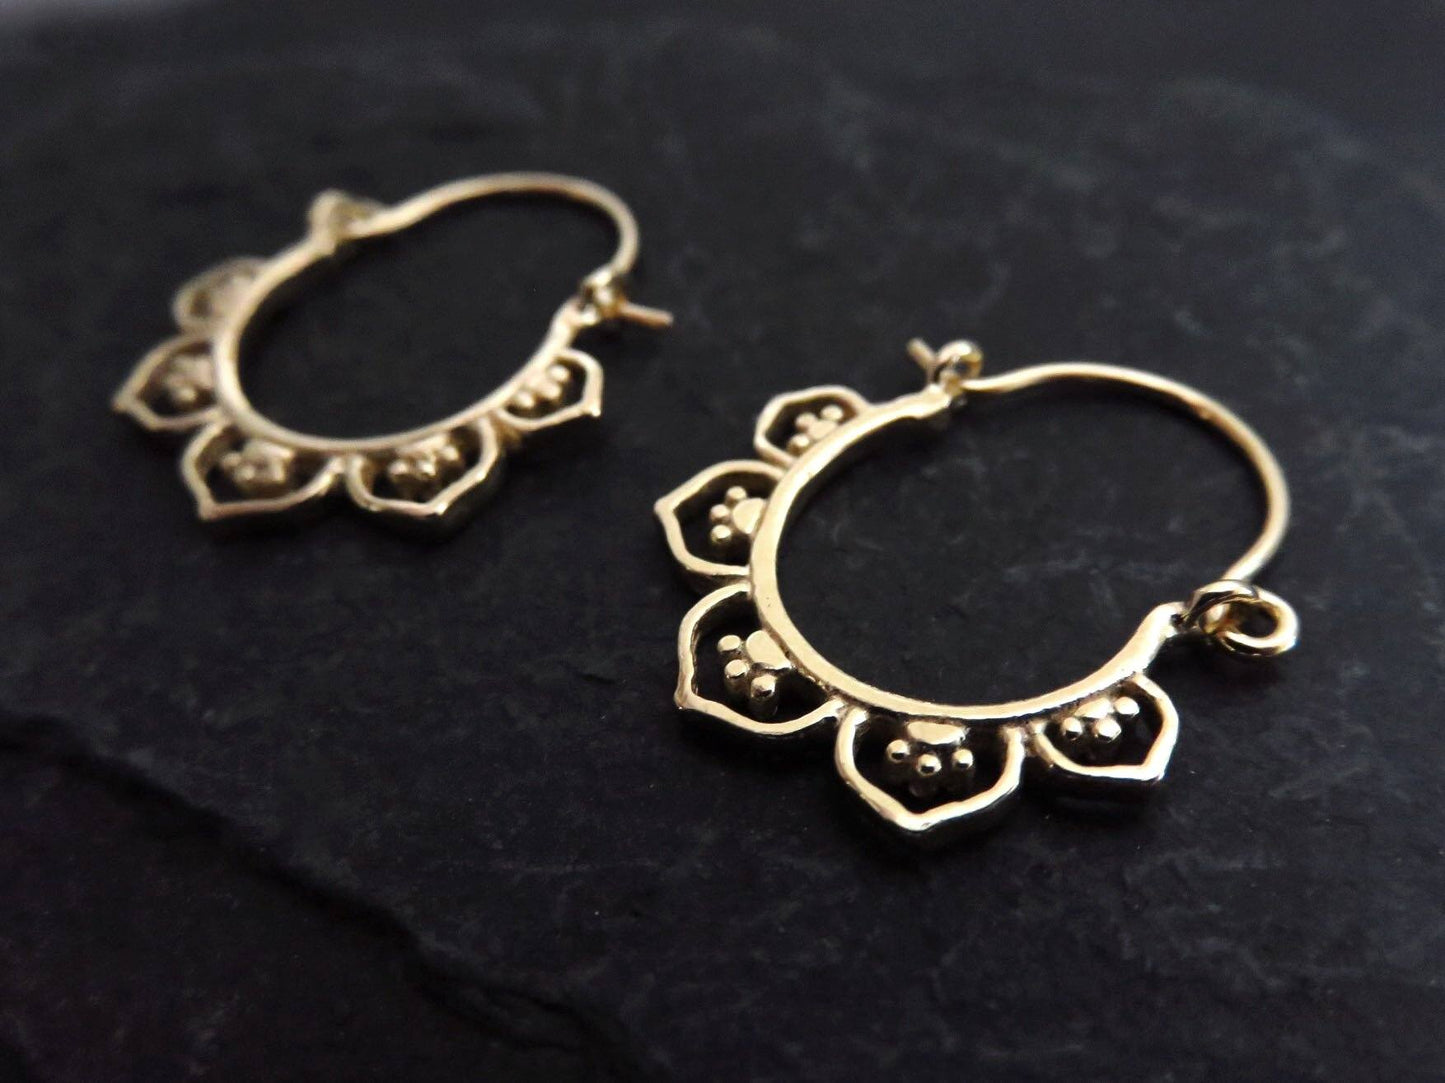 mini hoop earrings with flower pattern made of silver or silver-gold plated